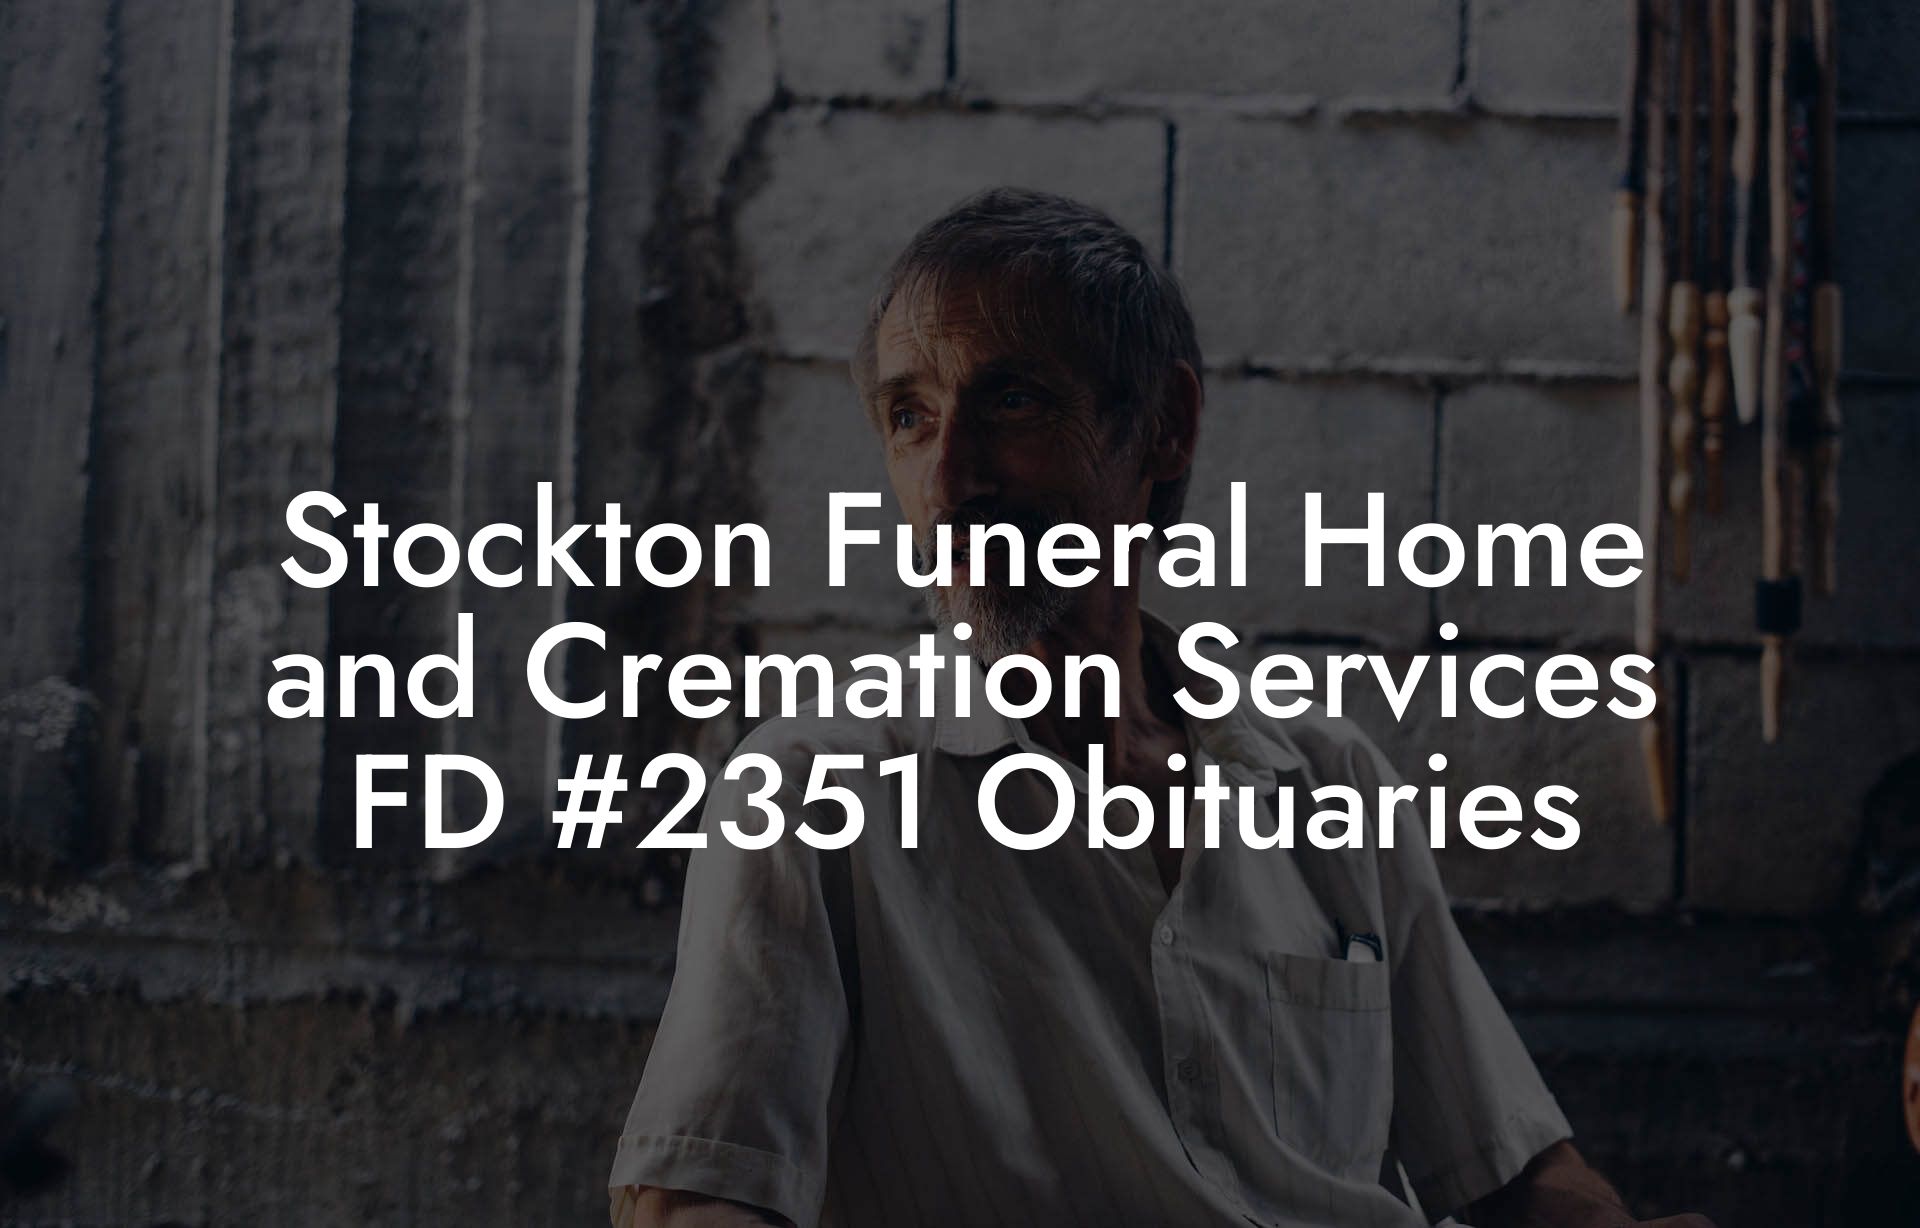 Stockton Funeral Home and Cremation Services FD #2351 Obituaries